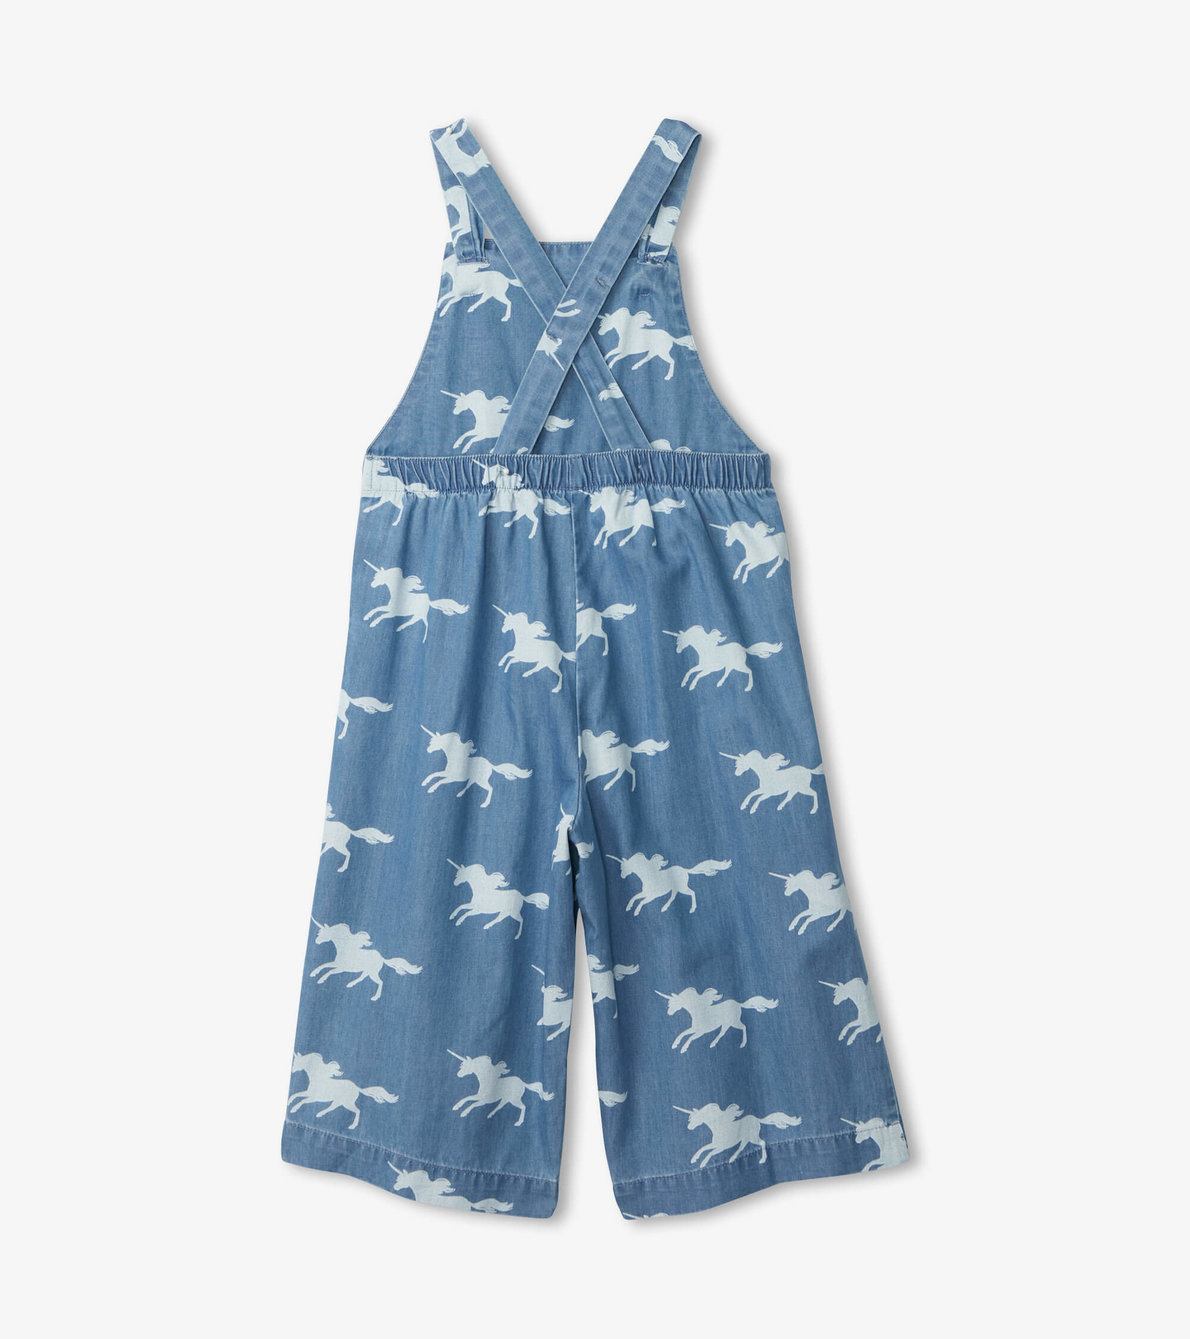 View larger image of Unicorn Silhouettes Chambray Romper